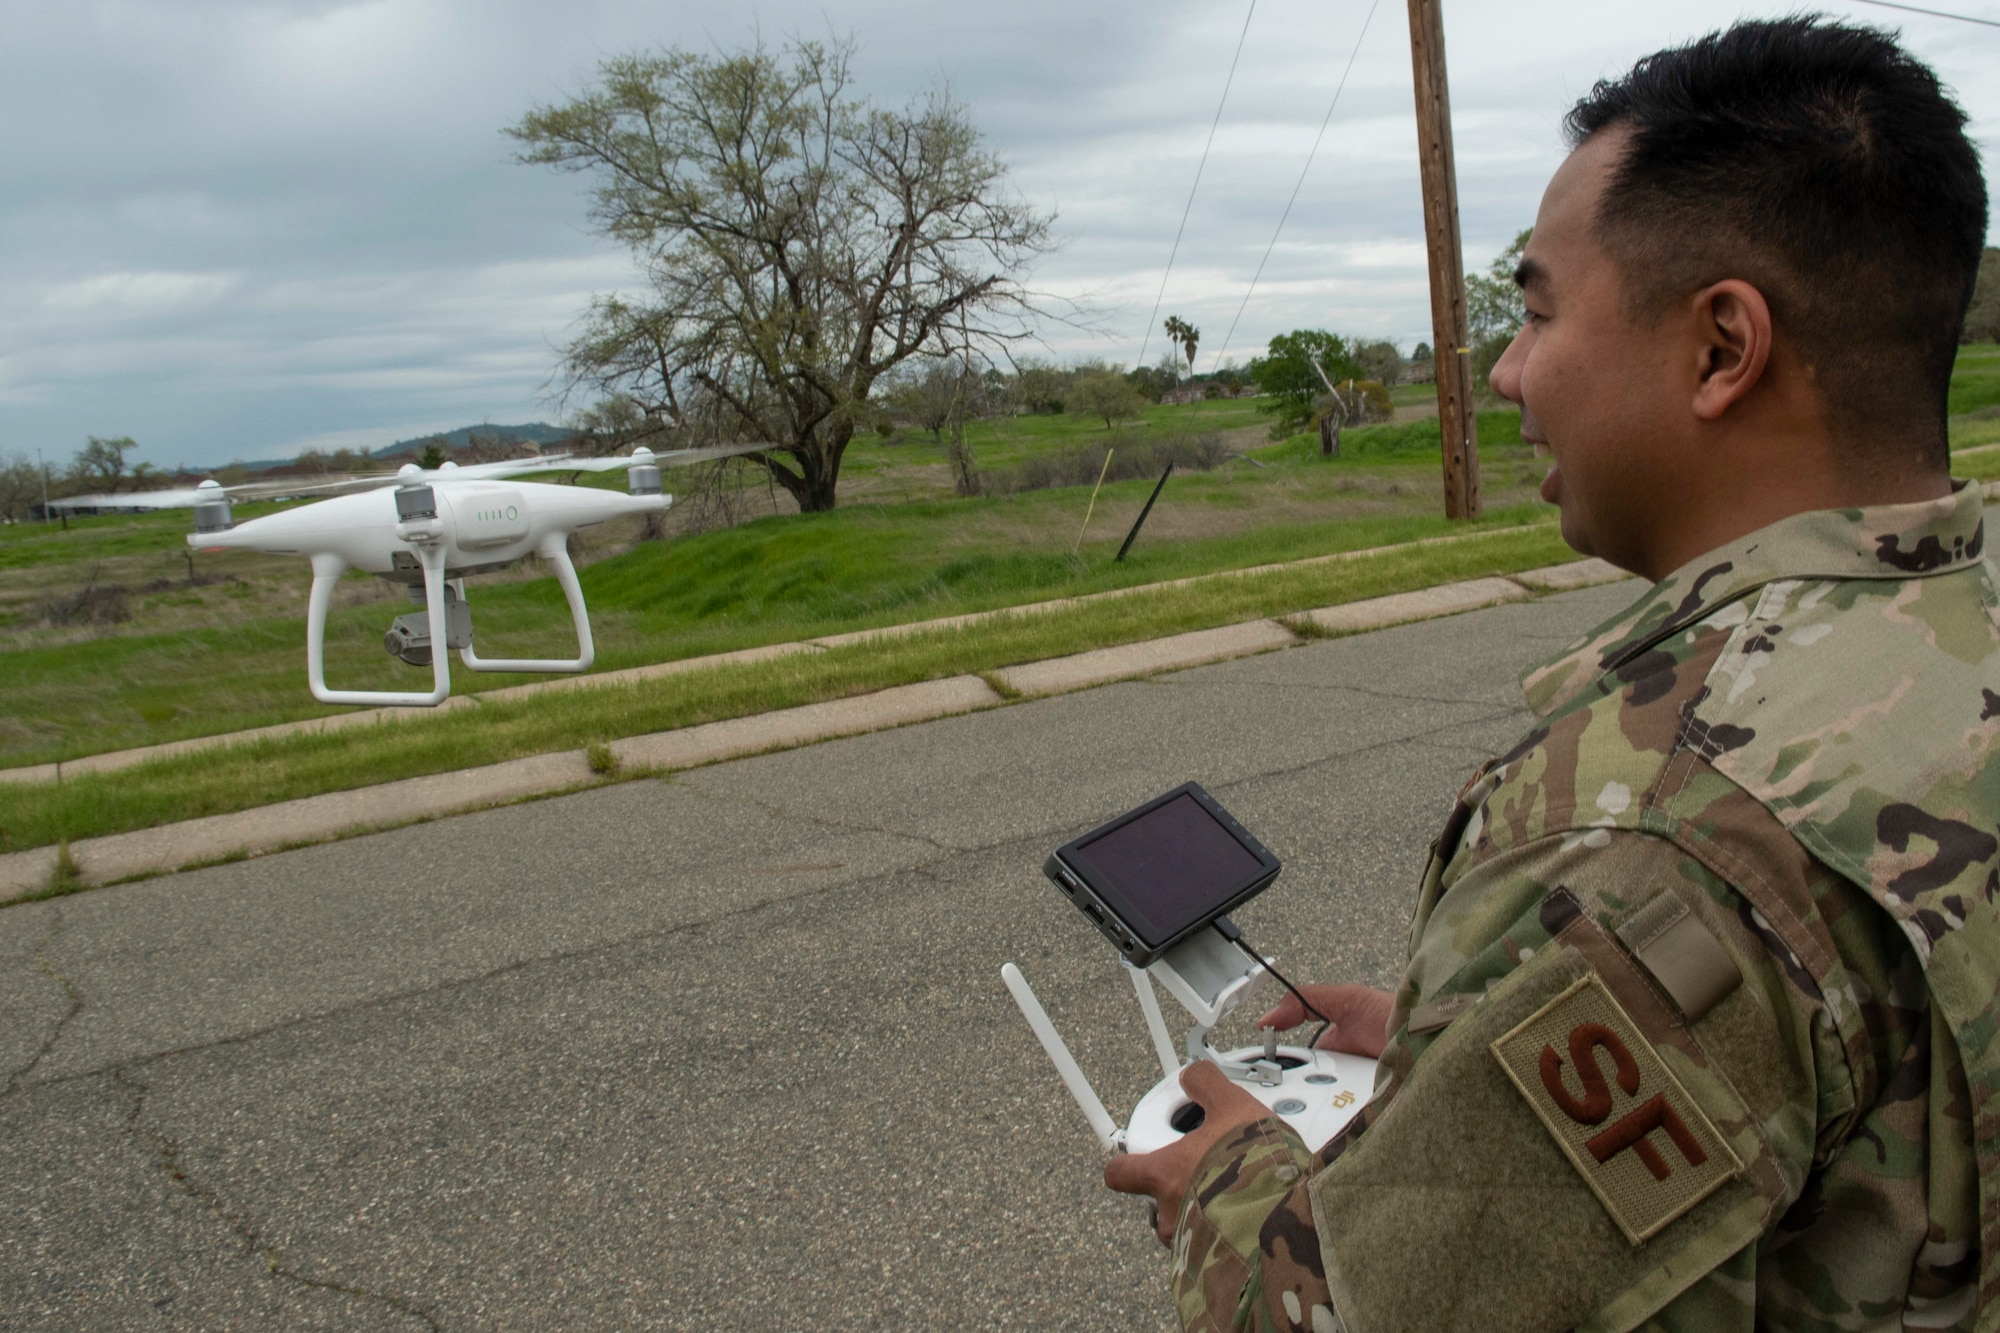 U.S. Air Force Staff Sgt. Francis Arnaldo, 9th Security Forces Squadron resource protection NCO in charge, flies a drone while testing out the Hivemapper program capabilities at Beale Air Force Base, California, April 12, 2019. The Hivemapper program is a three-dimensional drone that can map infrastructure while providing visualization and analytic tools. (U.S. Air Force photo by Tech. Sgt. Veronica Montes)